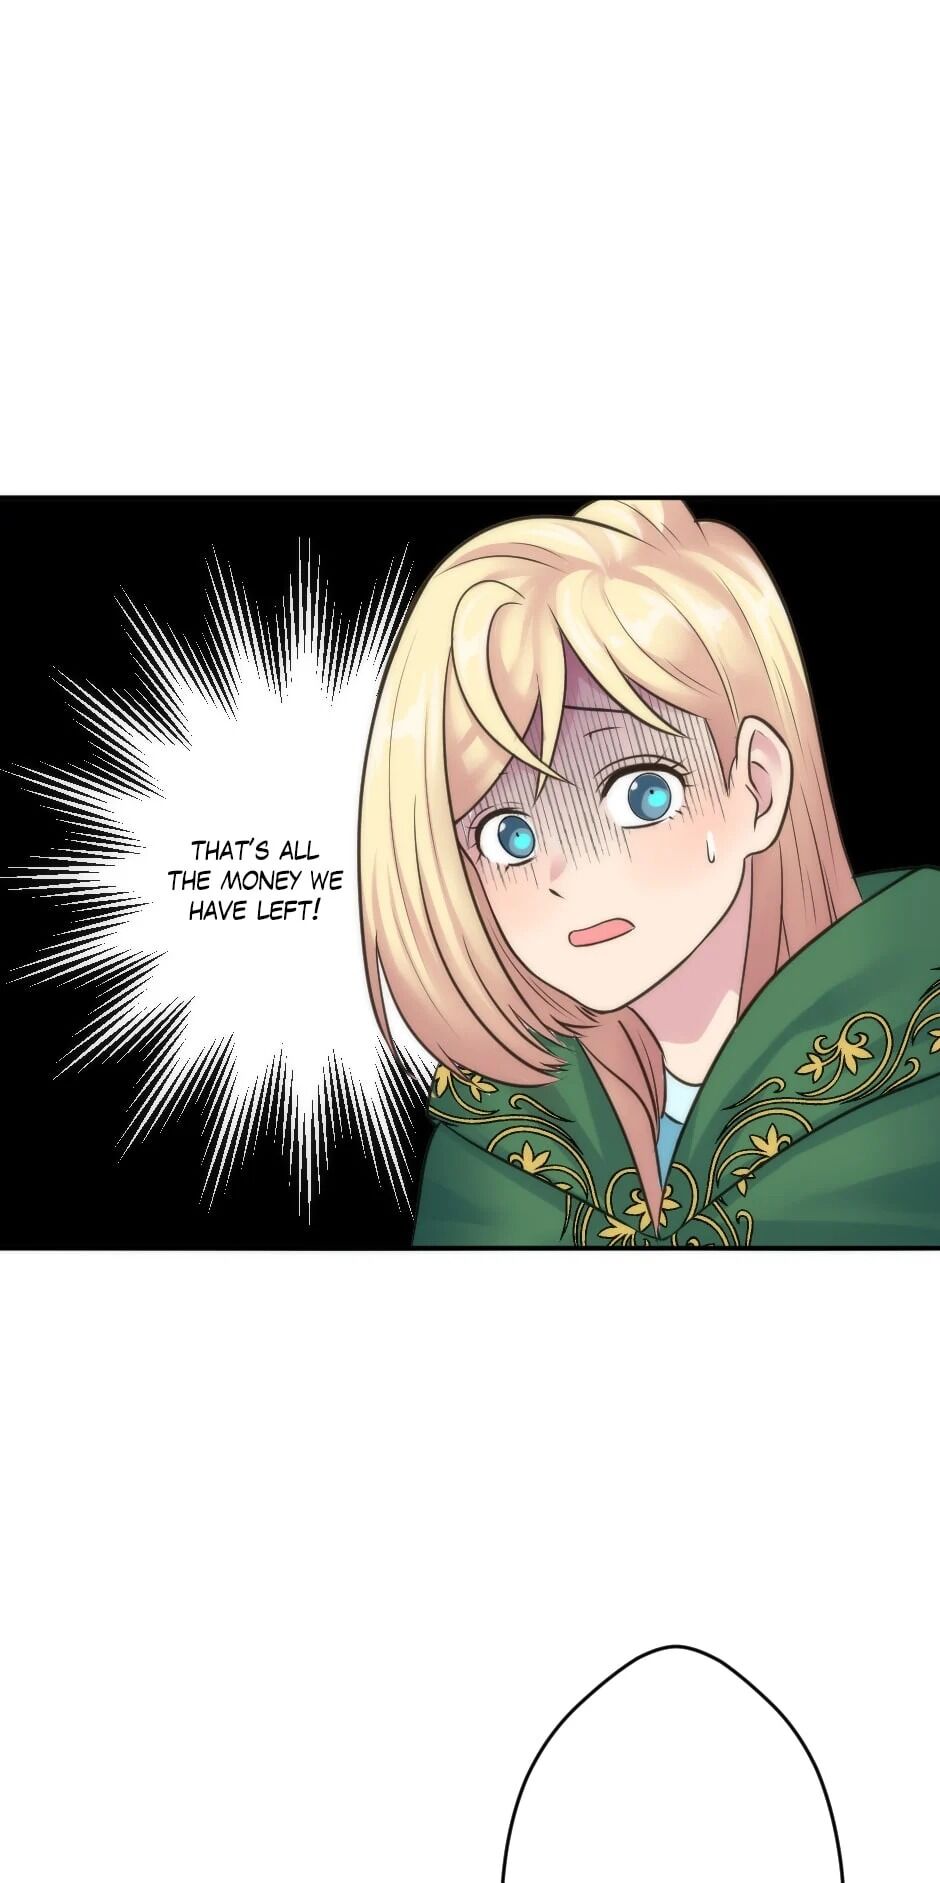 The Dragon Prince’s Bride chapter 33